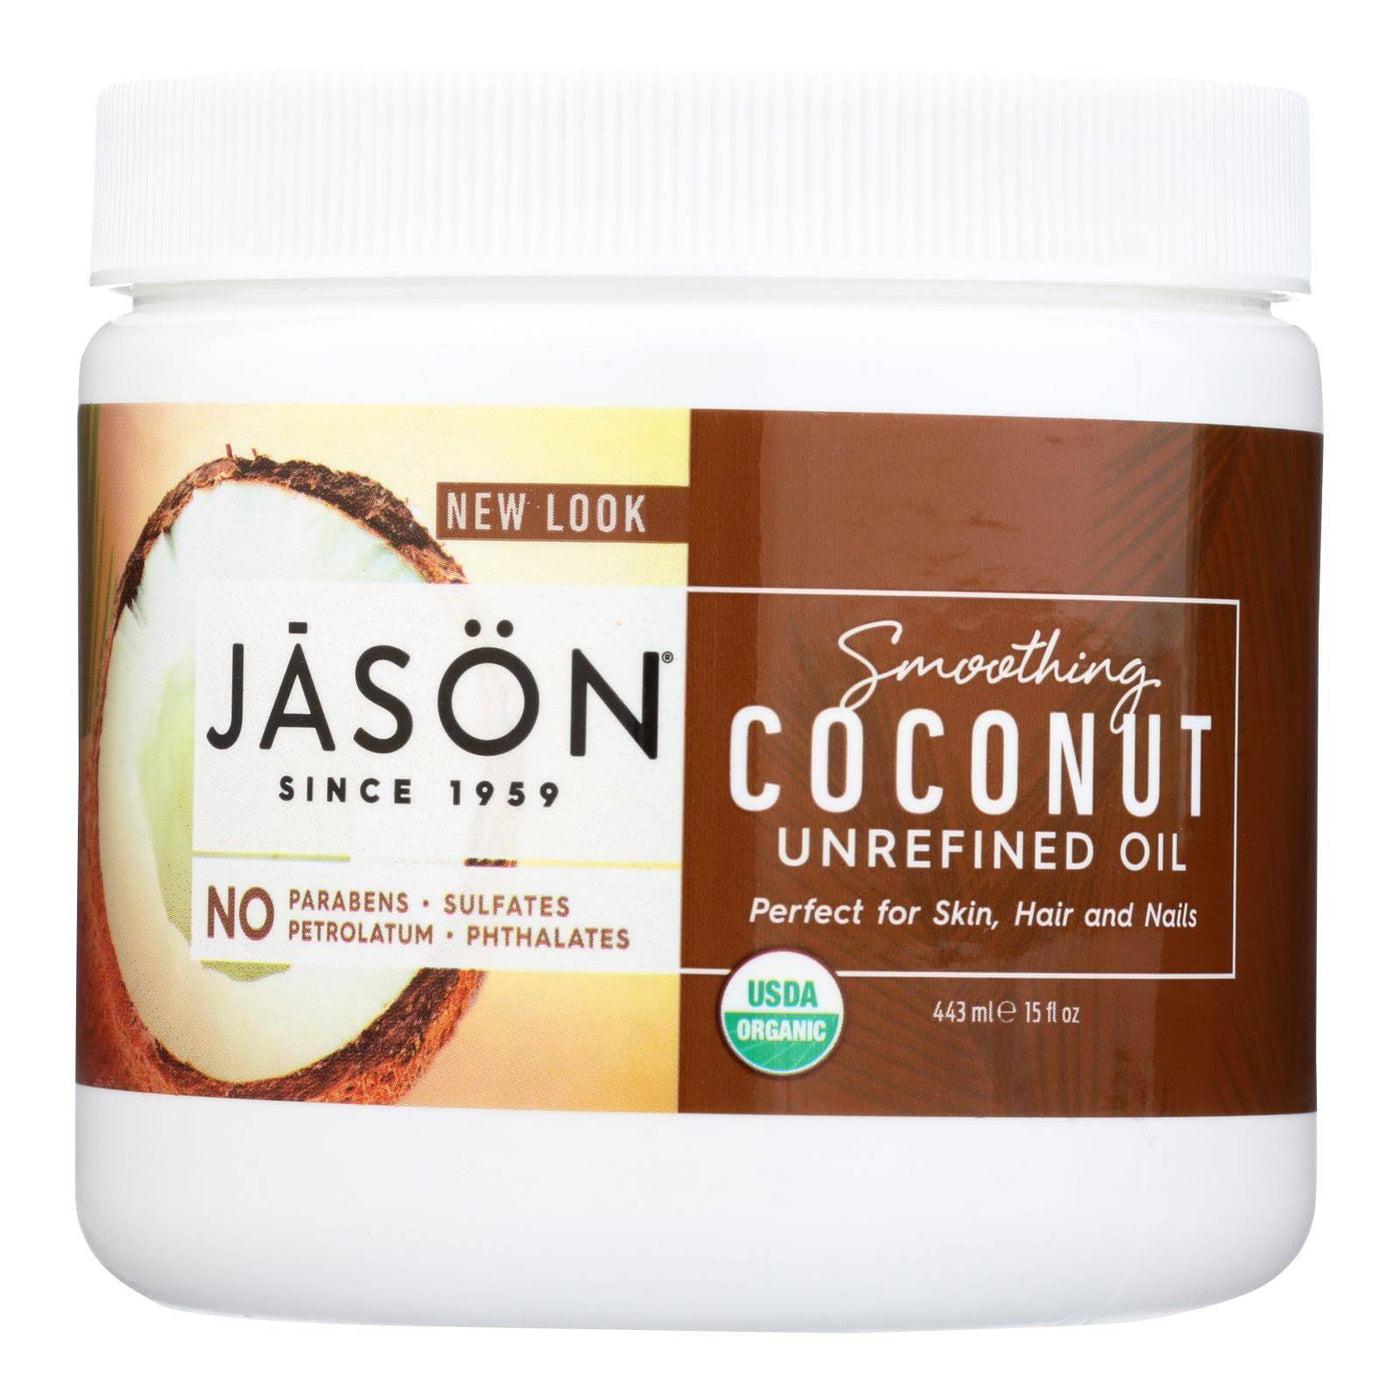 Buy Jason Natural Products Coconut Oil - Organic - Virgin - 15 Fl Oz  at OnlyNaturals.us